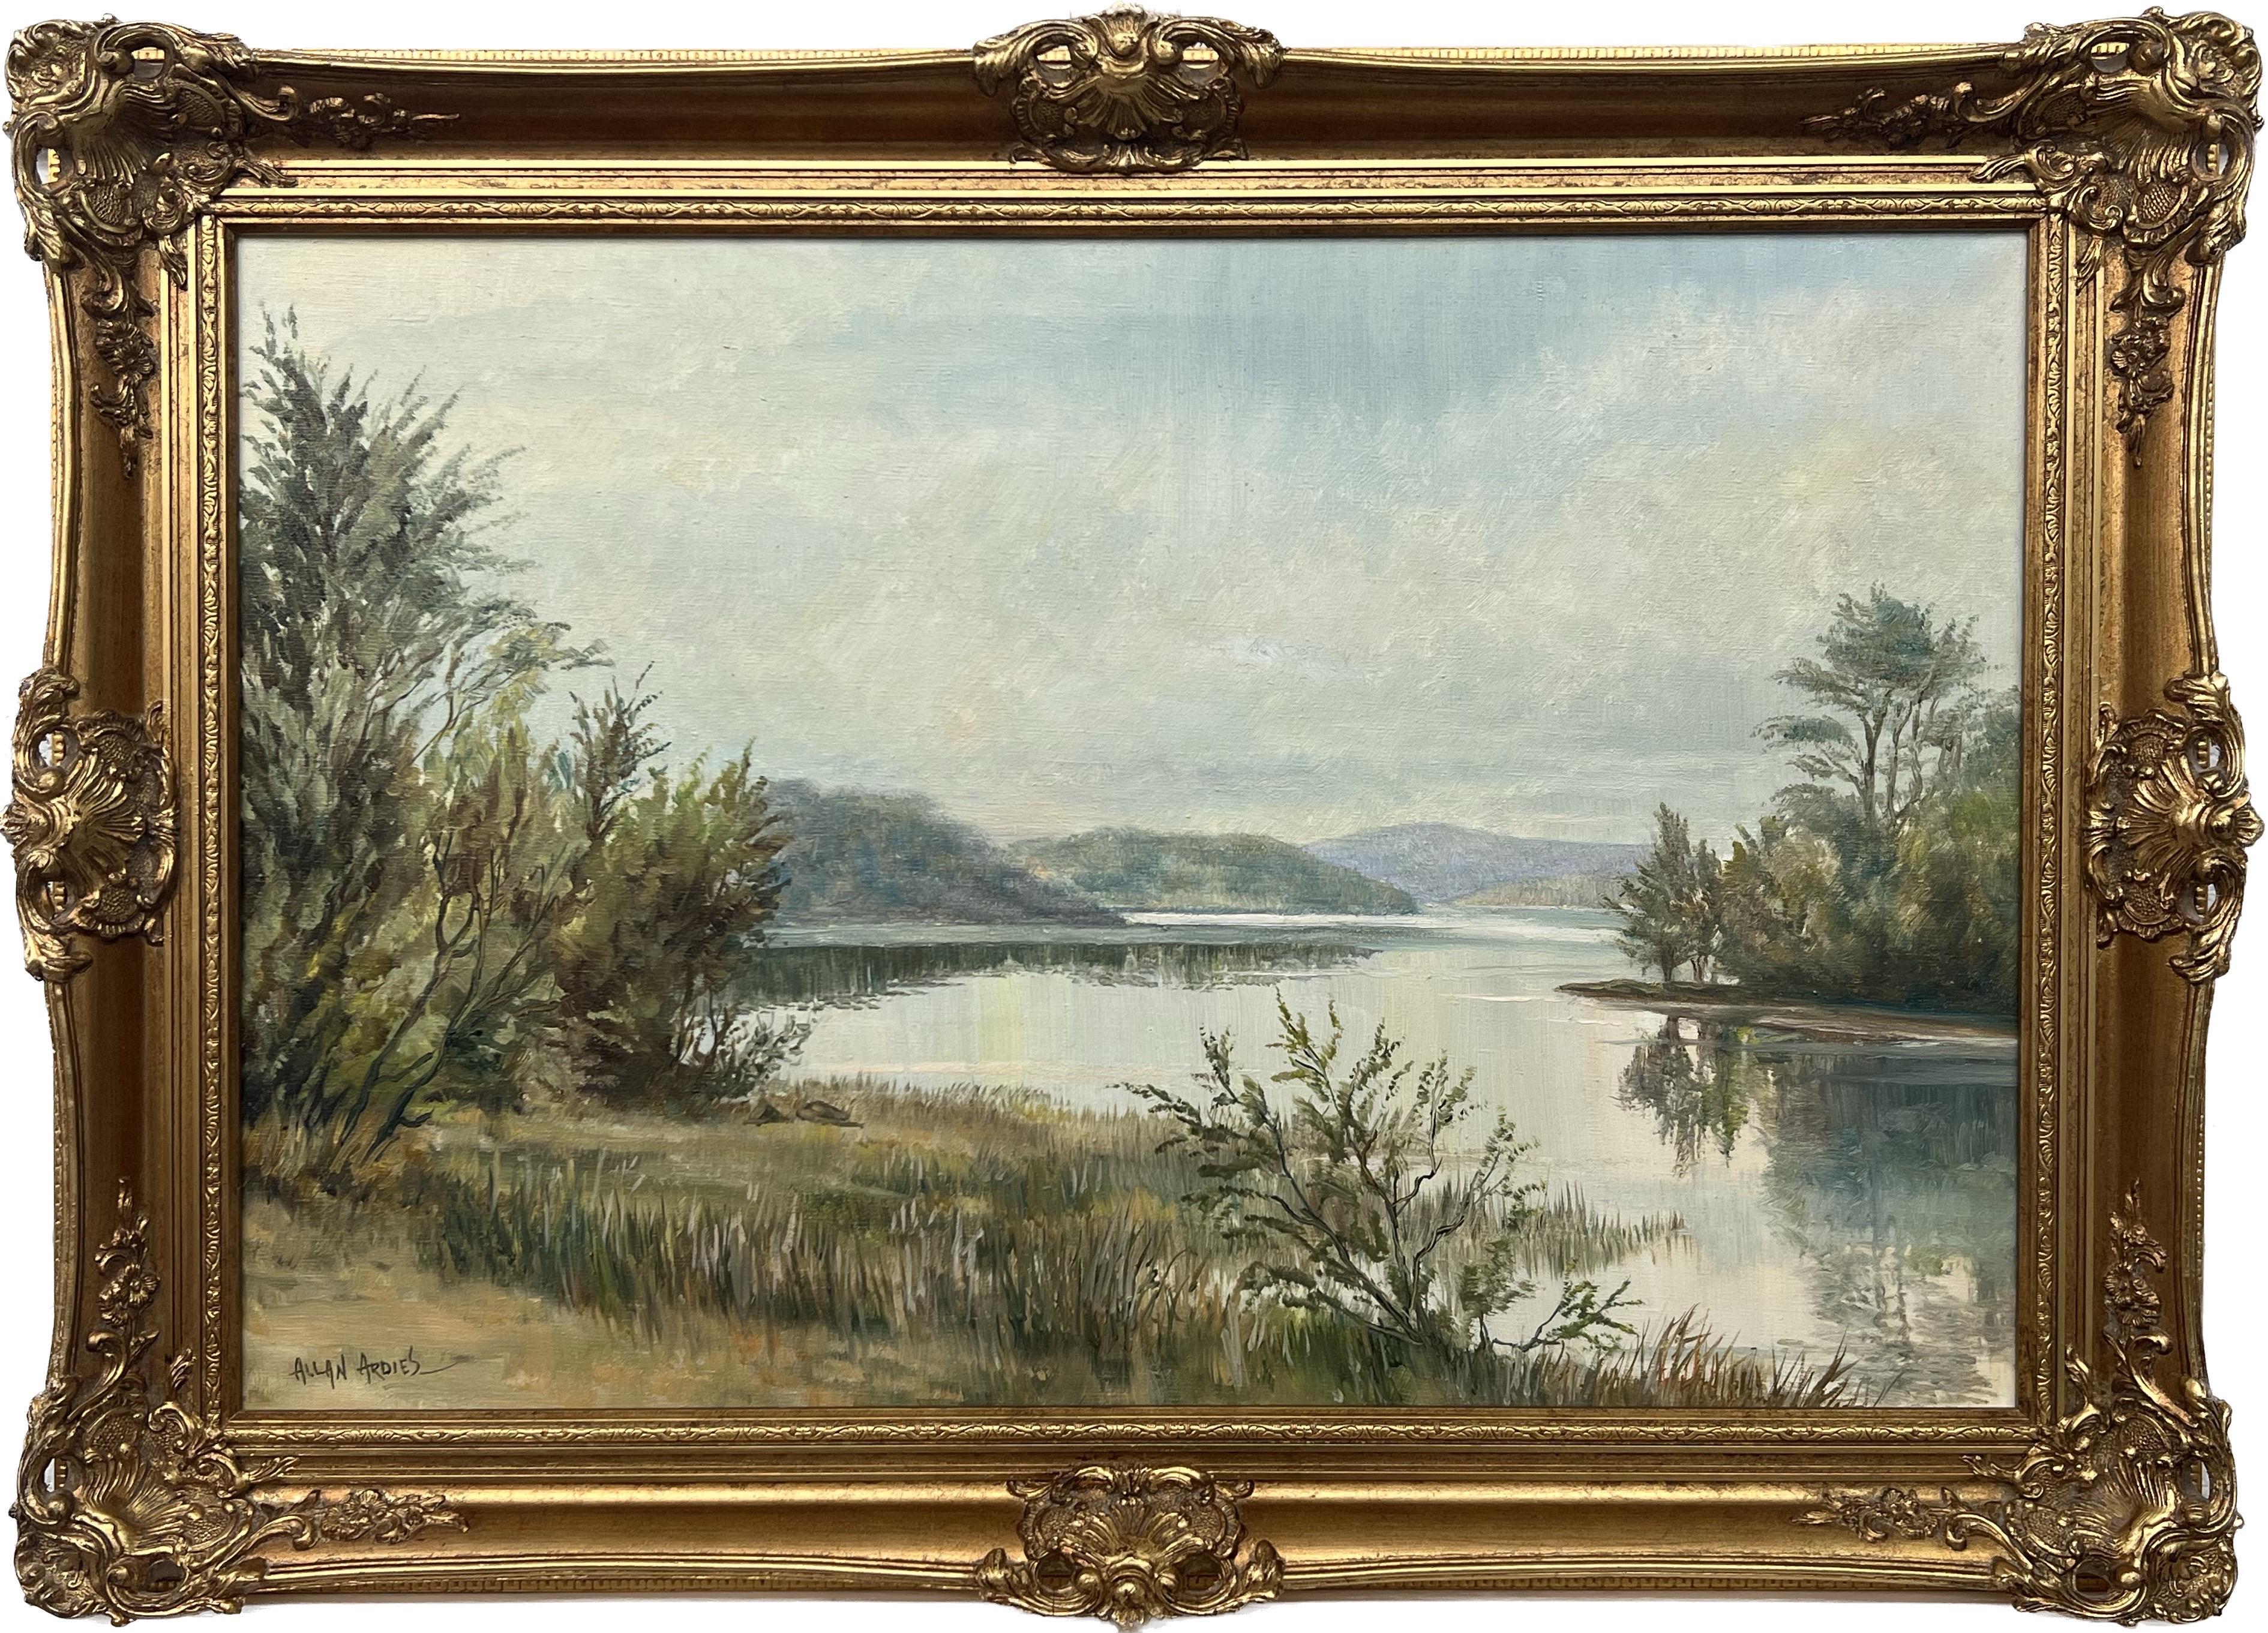 Oil Painting of a Tree-Lined River Lake Landscape in the Irish Countryside by 20th Century Artist, Allan Ardies (1918 - 2014). An impressionist vintage original oil on canvas in good condition, presented in an ornate gold frame and ready to hang.